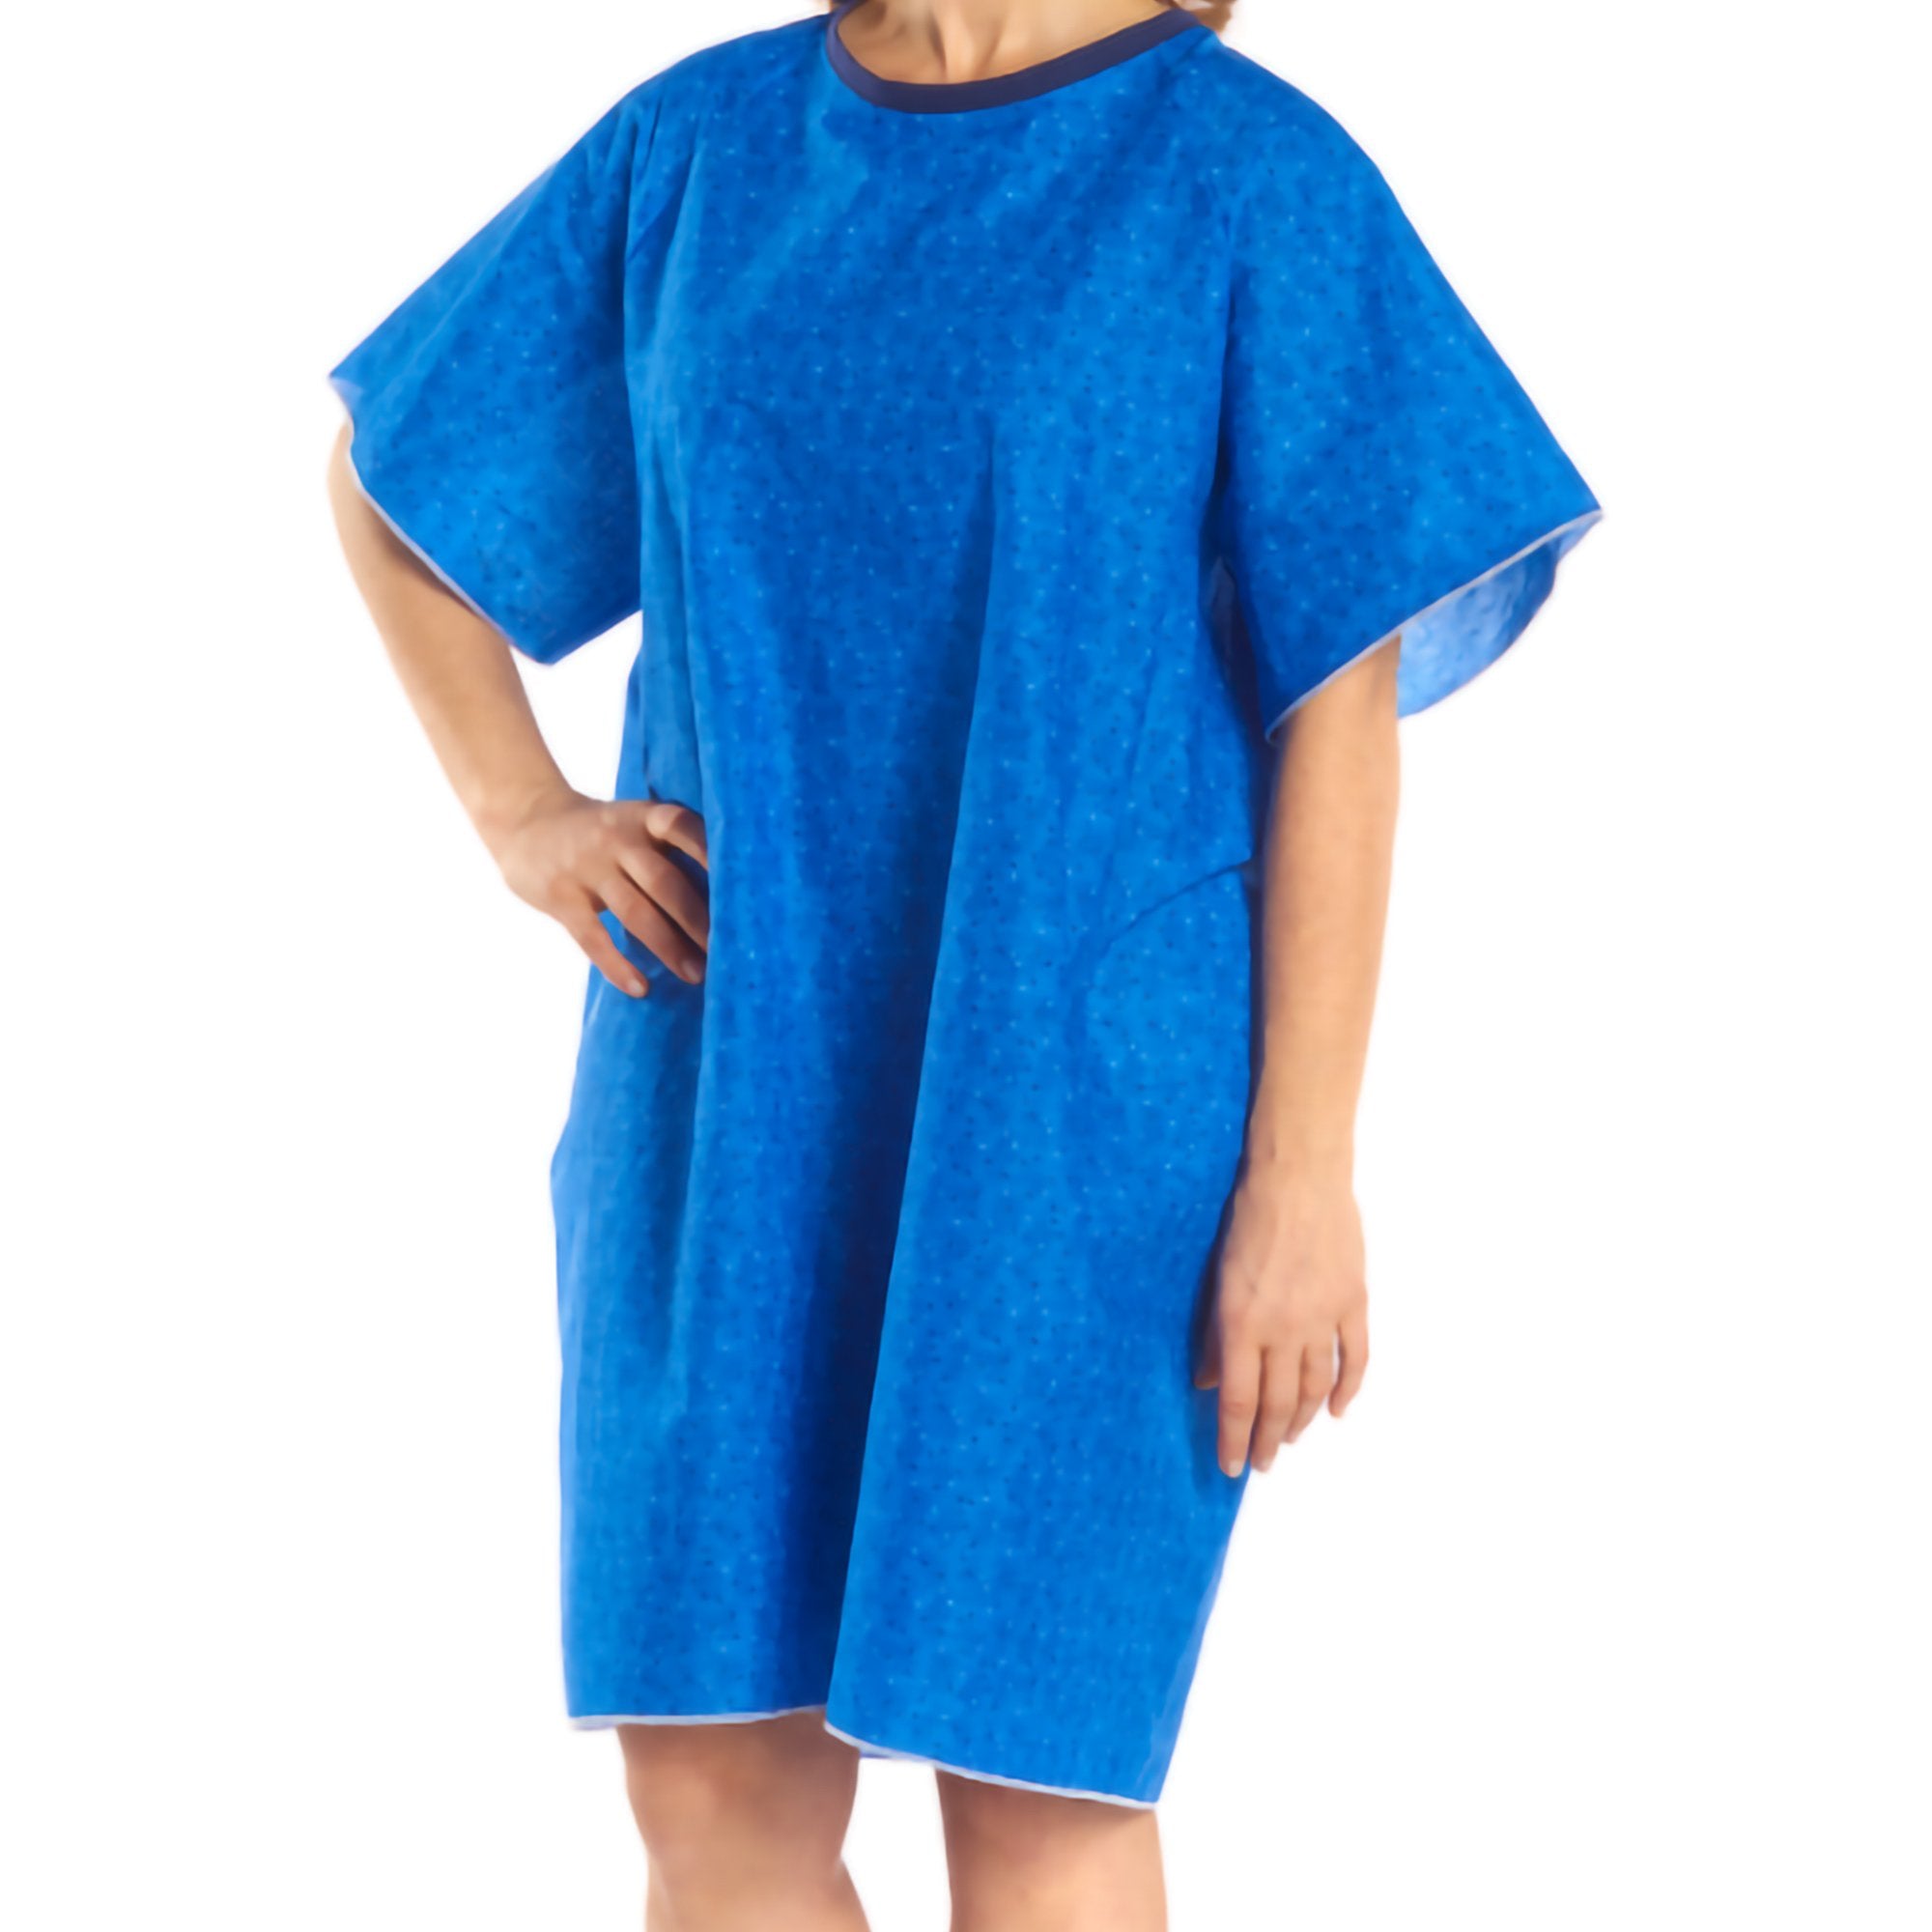 Patient Exam Gown TieBack™ One Size Fits Most Blue Marble Print Reusable